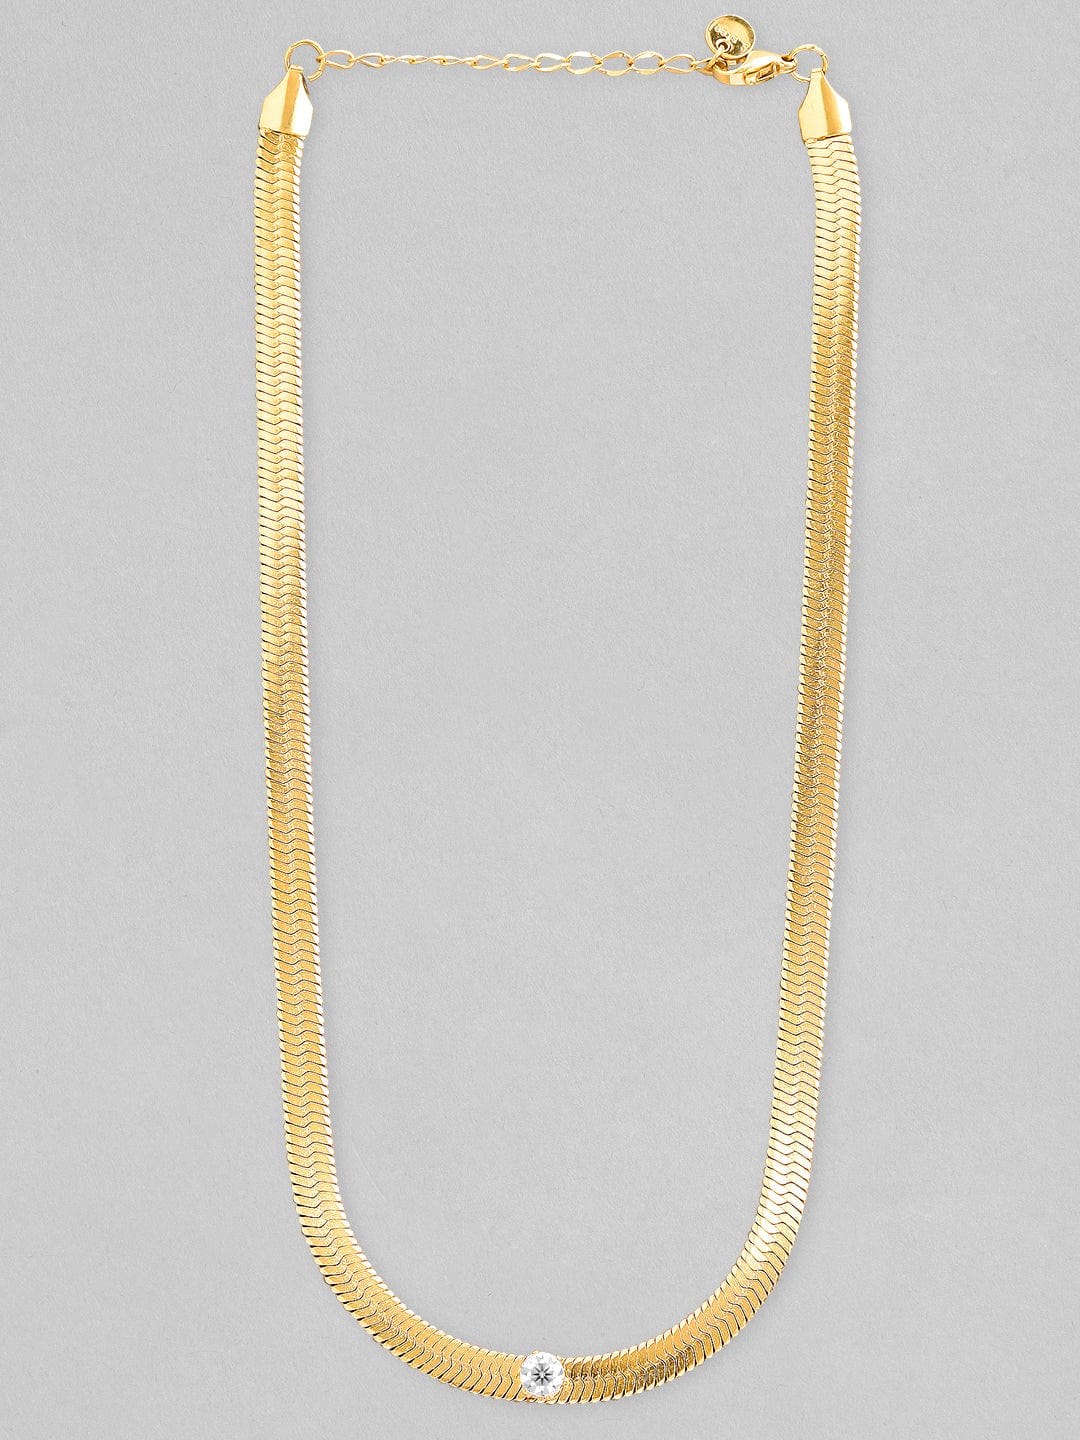 Rubans Voguish 24k Gold-Plated AD Studded Handcrafted Chain Necklace Necklace